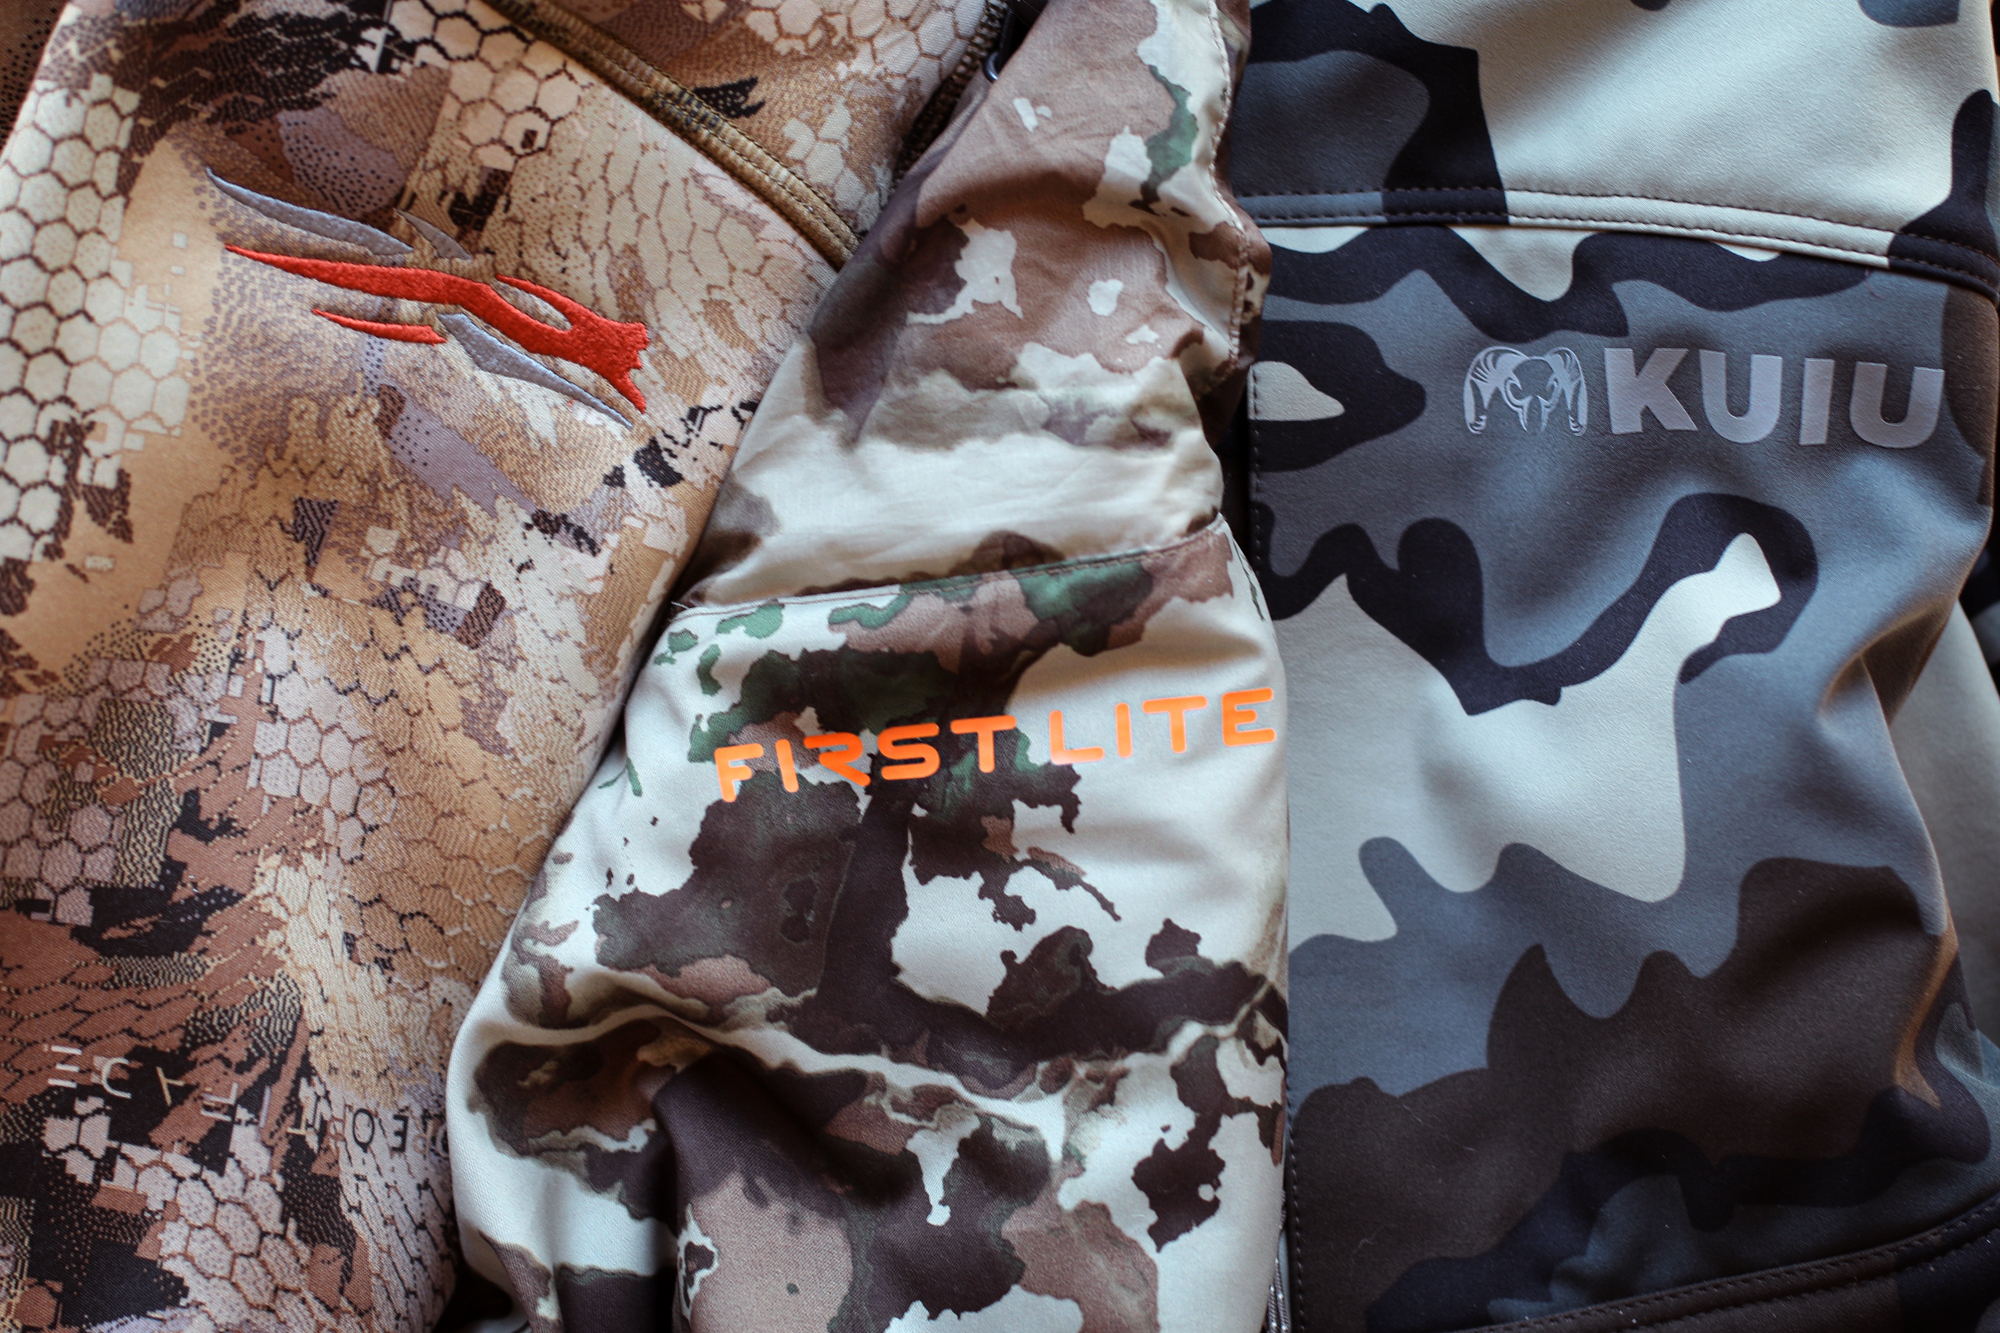 Hunting camouflage from brands like Sitka, First Lite, and Kuiu are made in Asia.